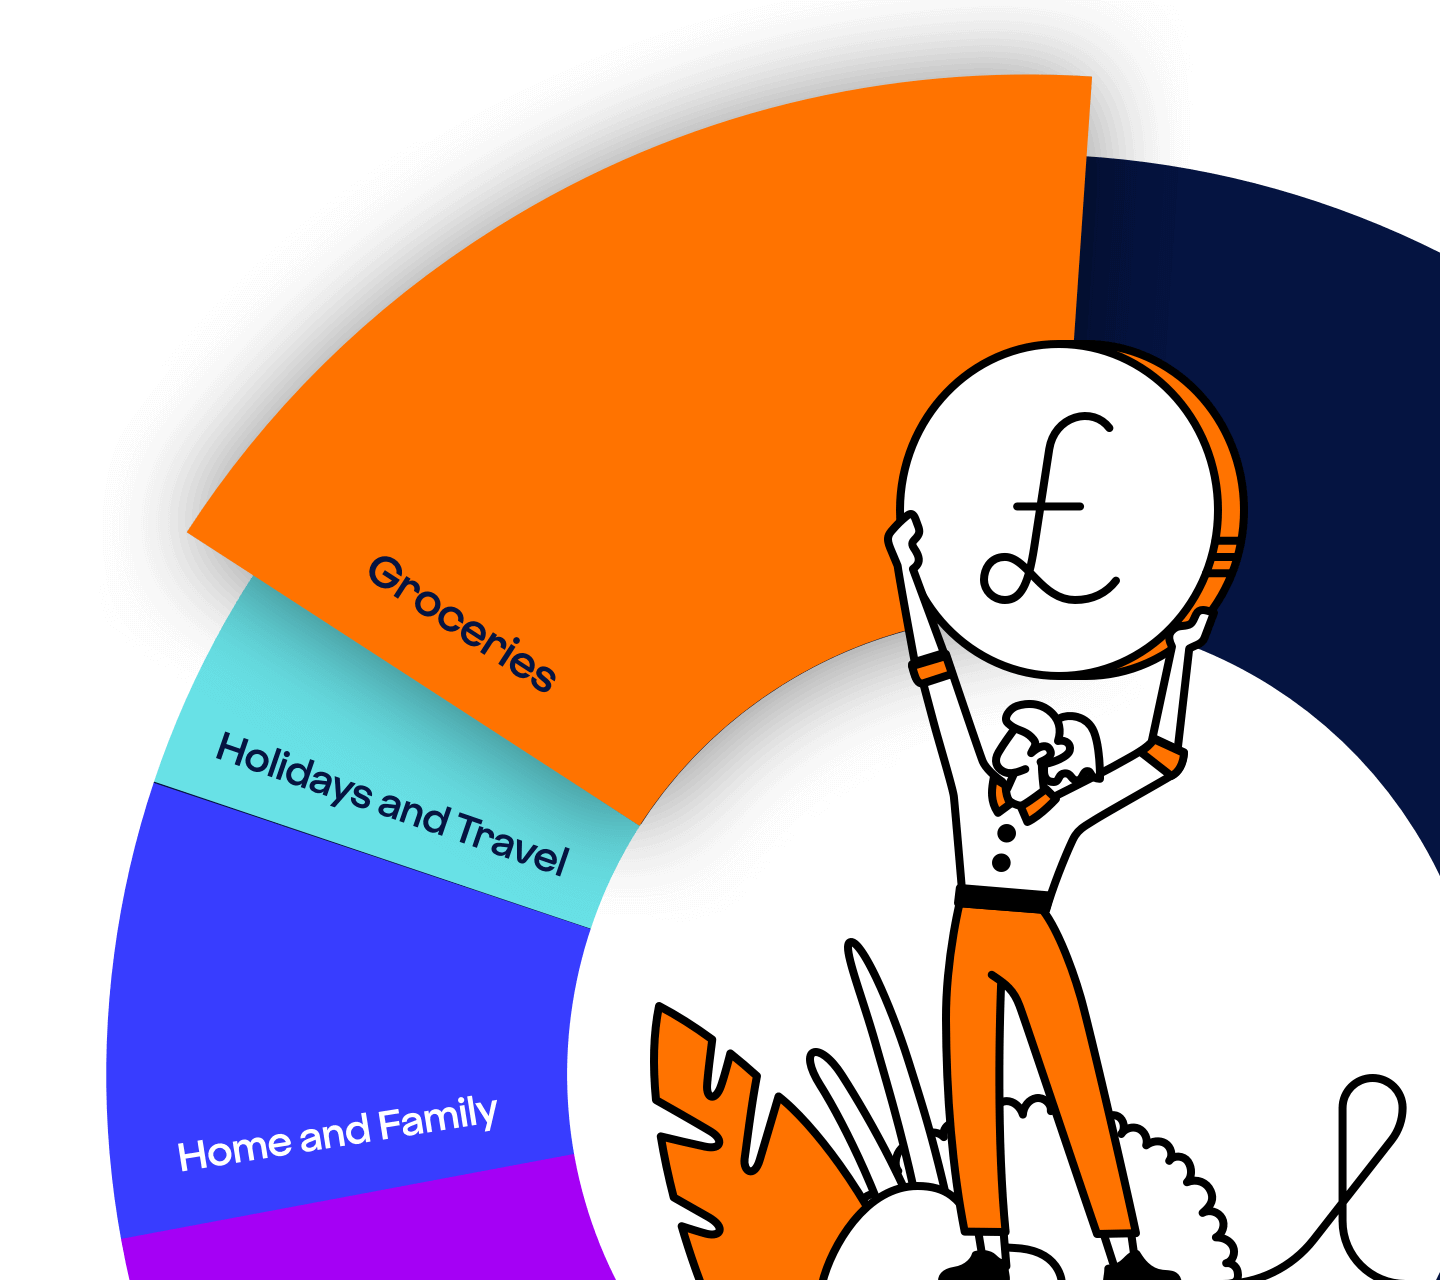 2022 playback pie chart that show's the breakdown of costs in 2022 from Virgin Money customers